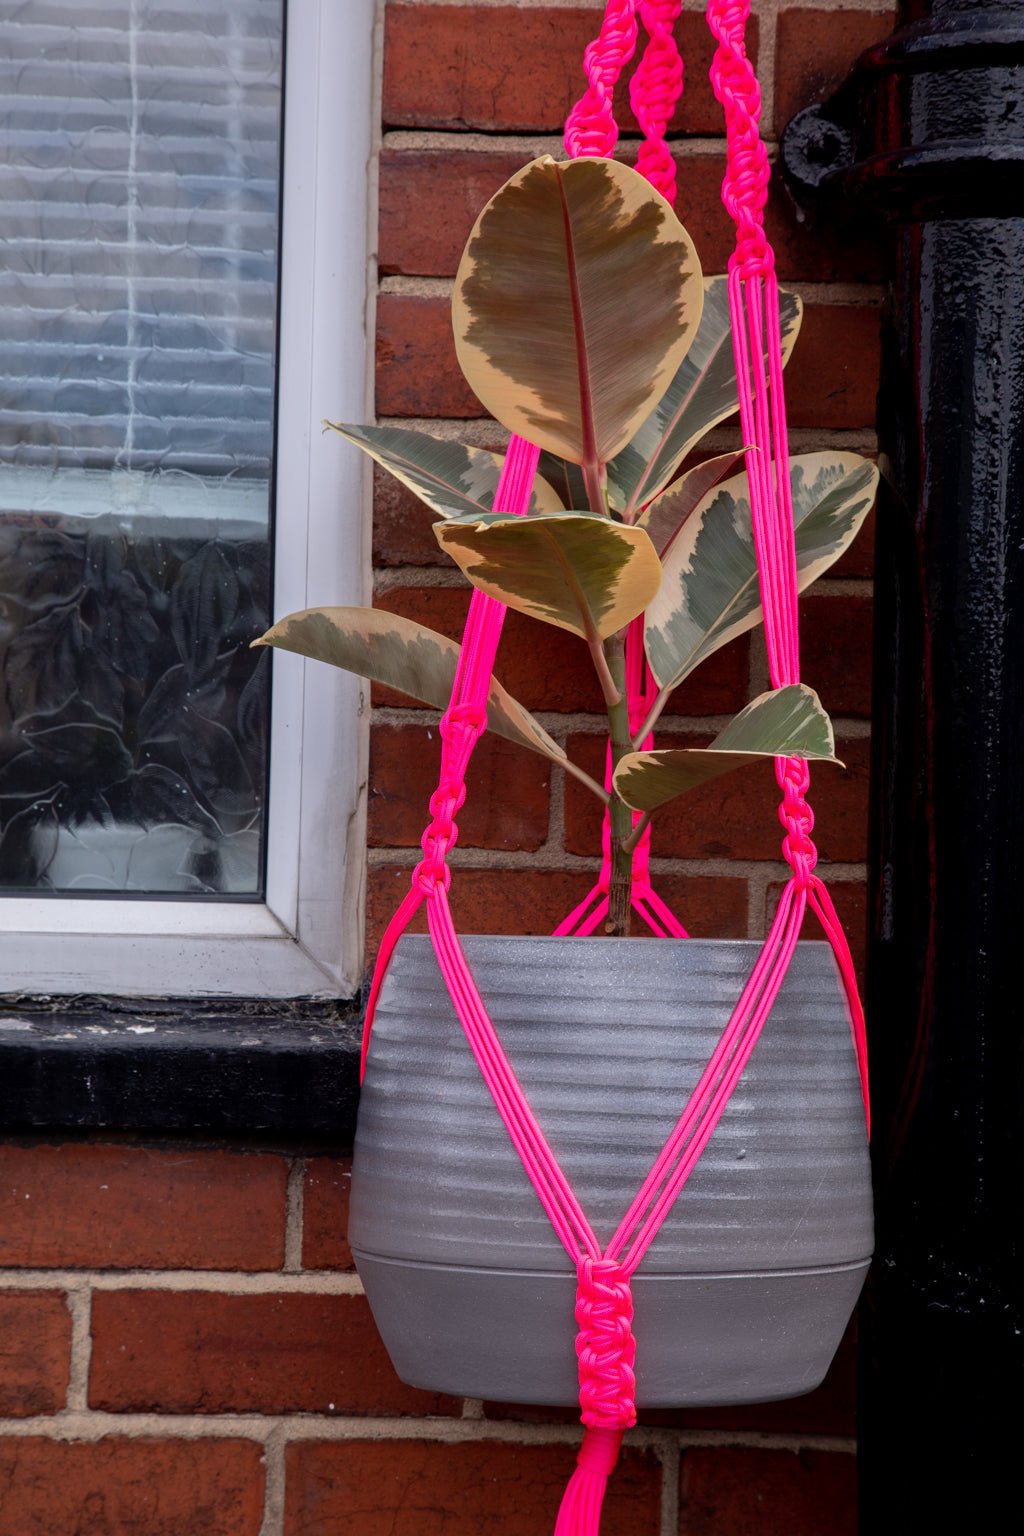 Buy Online Premium Quality and Beautiful Giant Macrame Plant Hanger - Hotpinkhangers